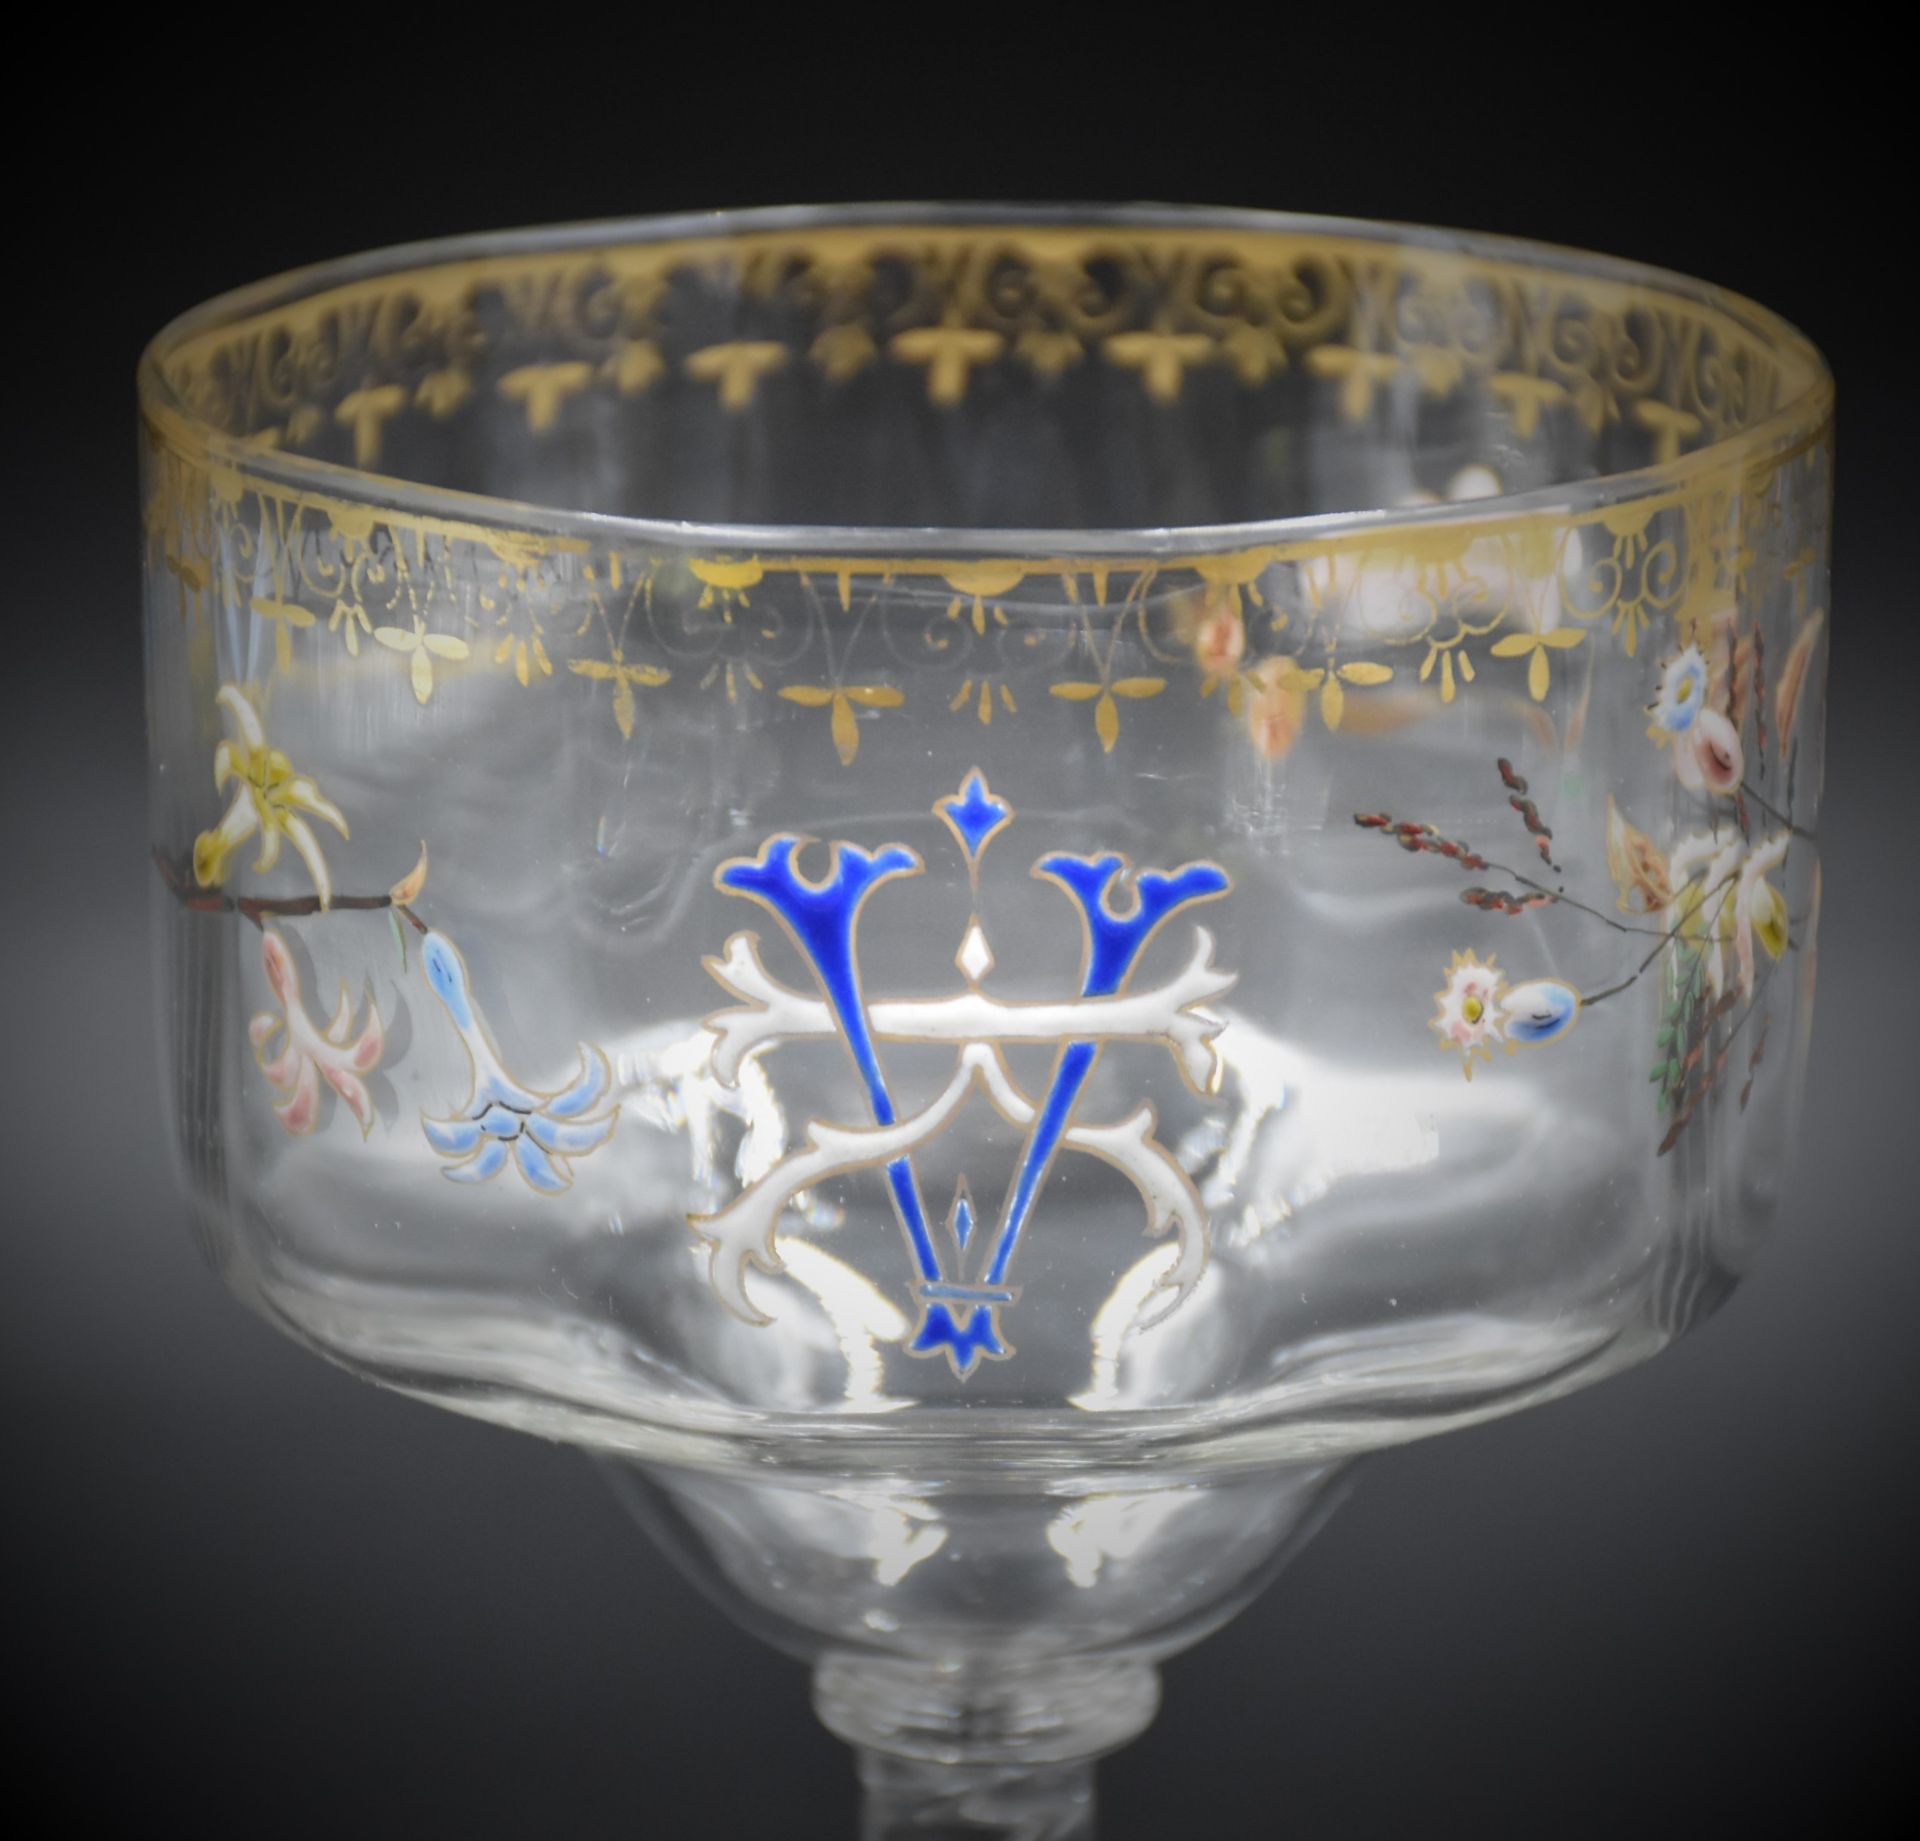 Emile GALLE (1846-1904). Chalice with enamelled decoration of flowers. Signed E. Gallé in Nancy.